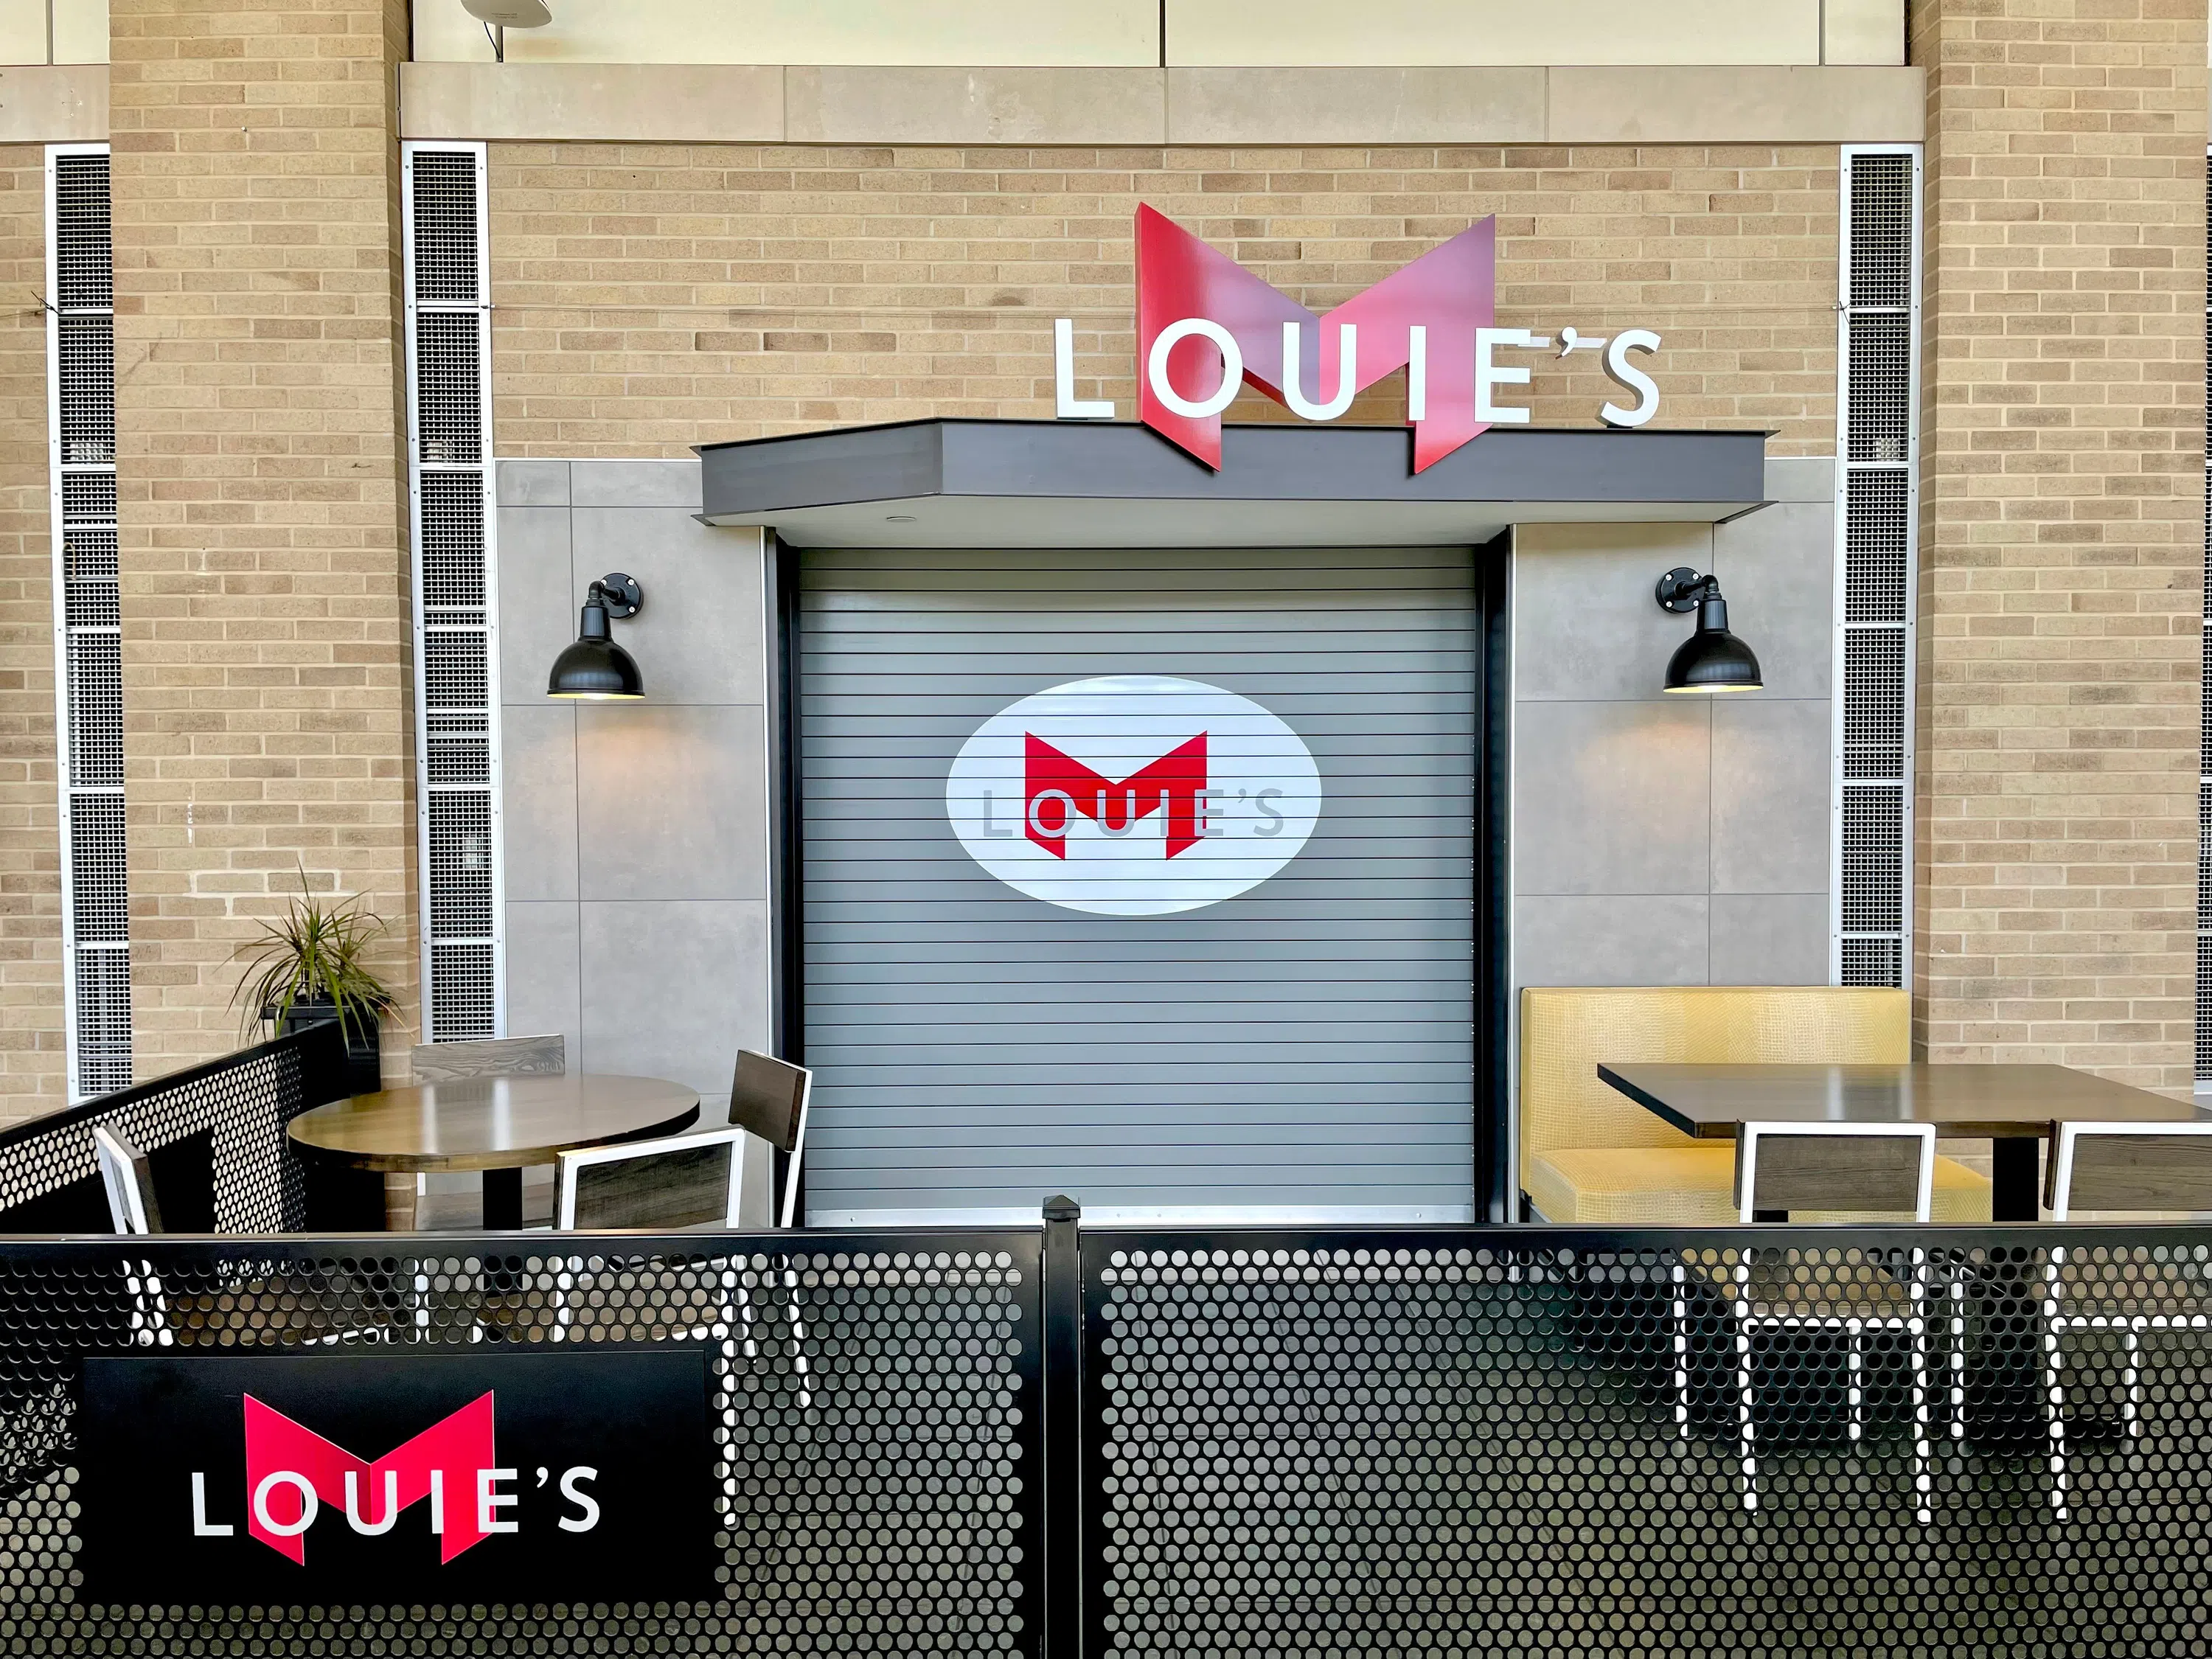 An indoor patio for students to eat their food from Louie's.